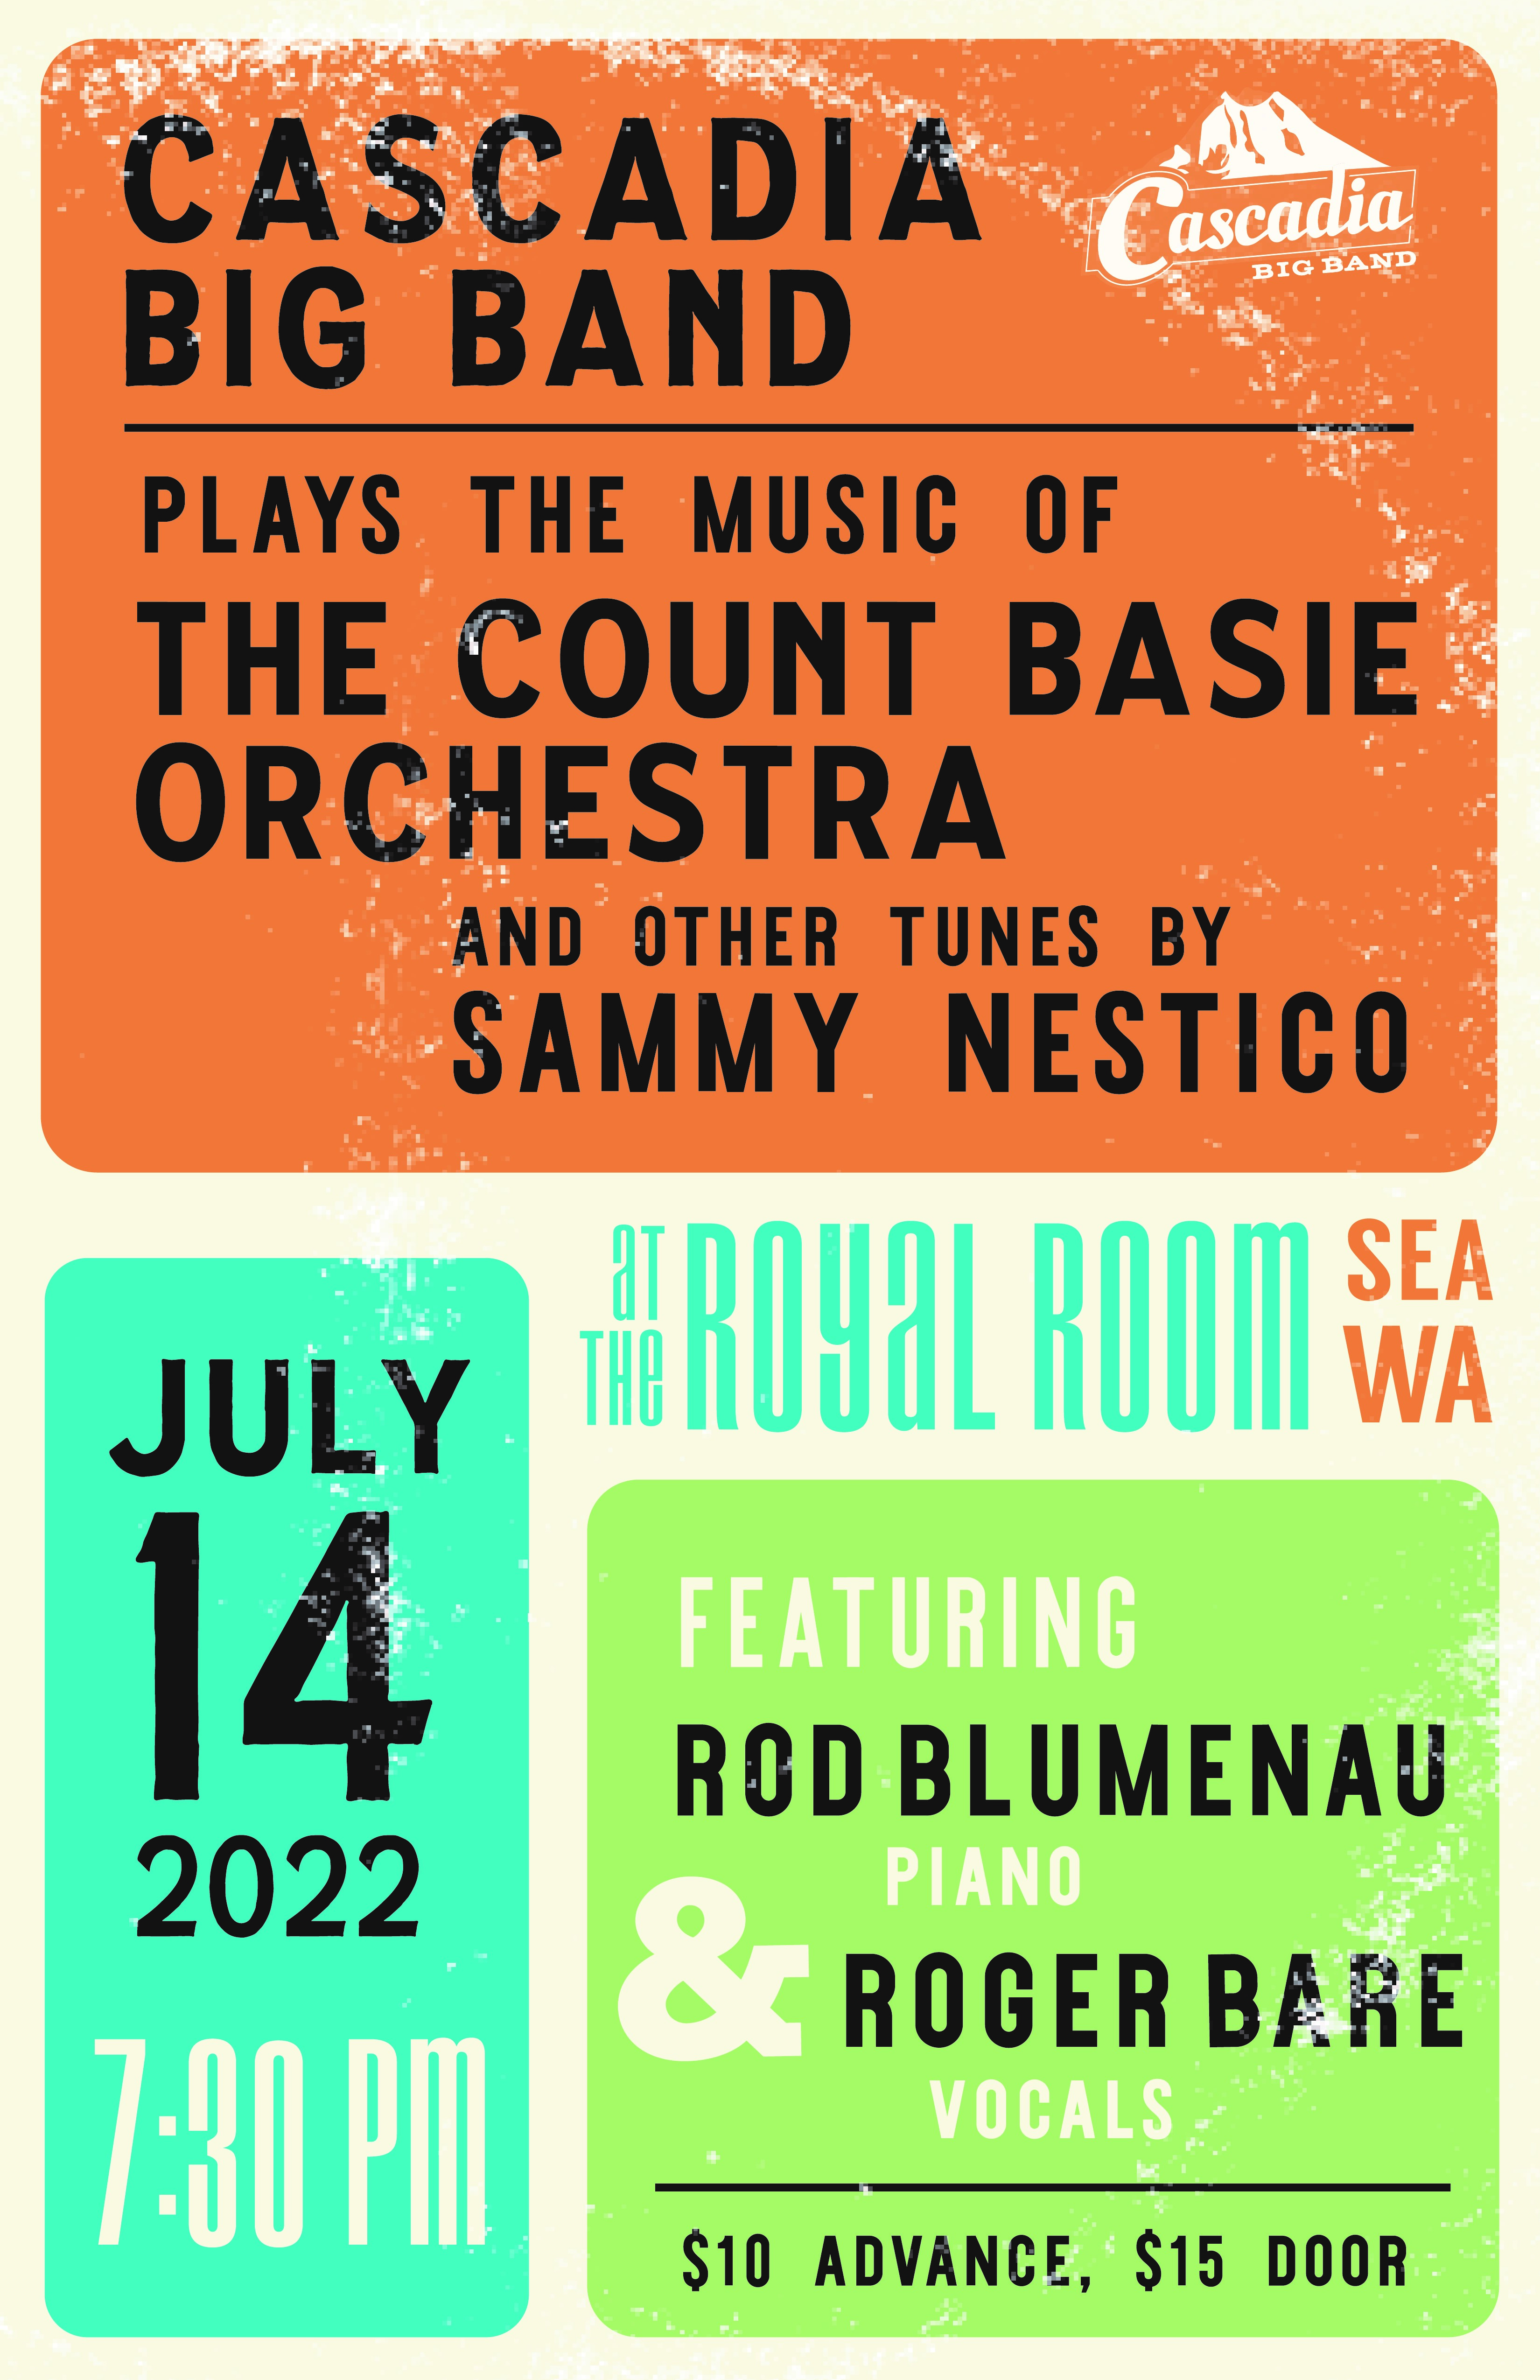 Cascadia Big Band: the music of The Count Basie Orchestra